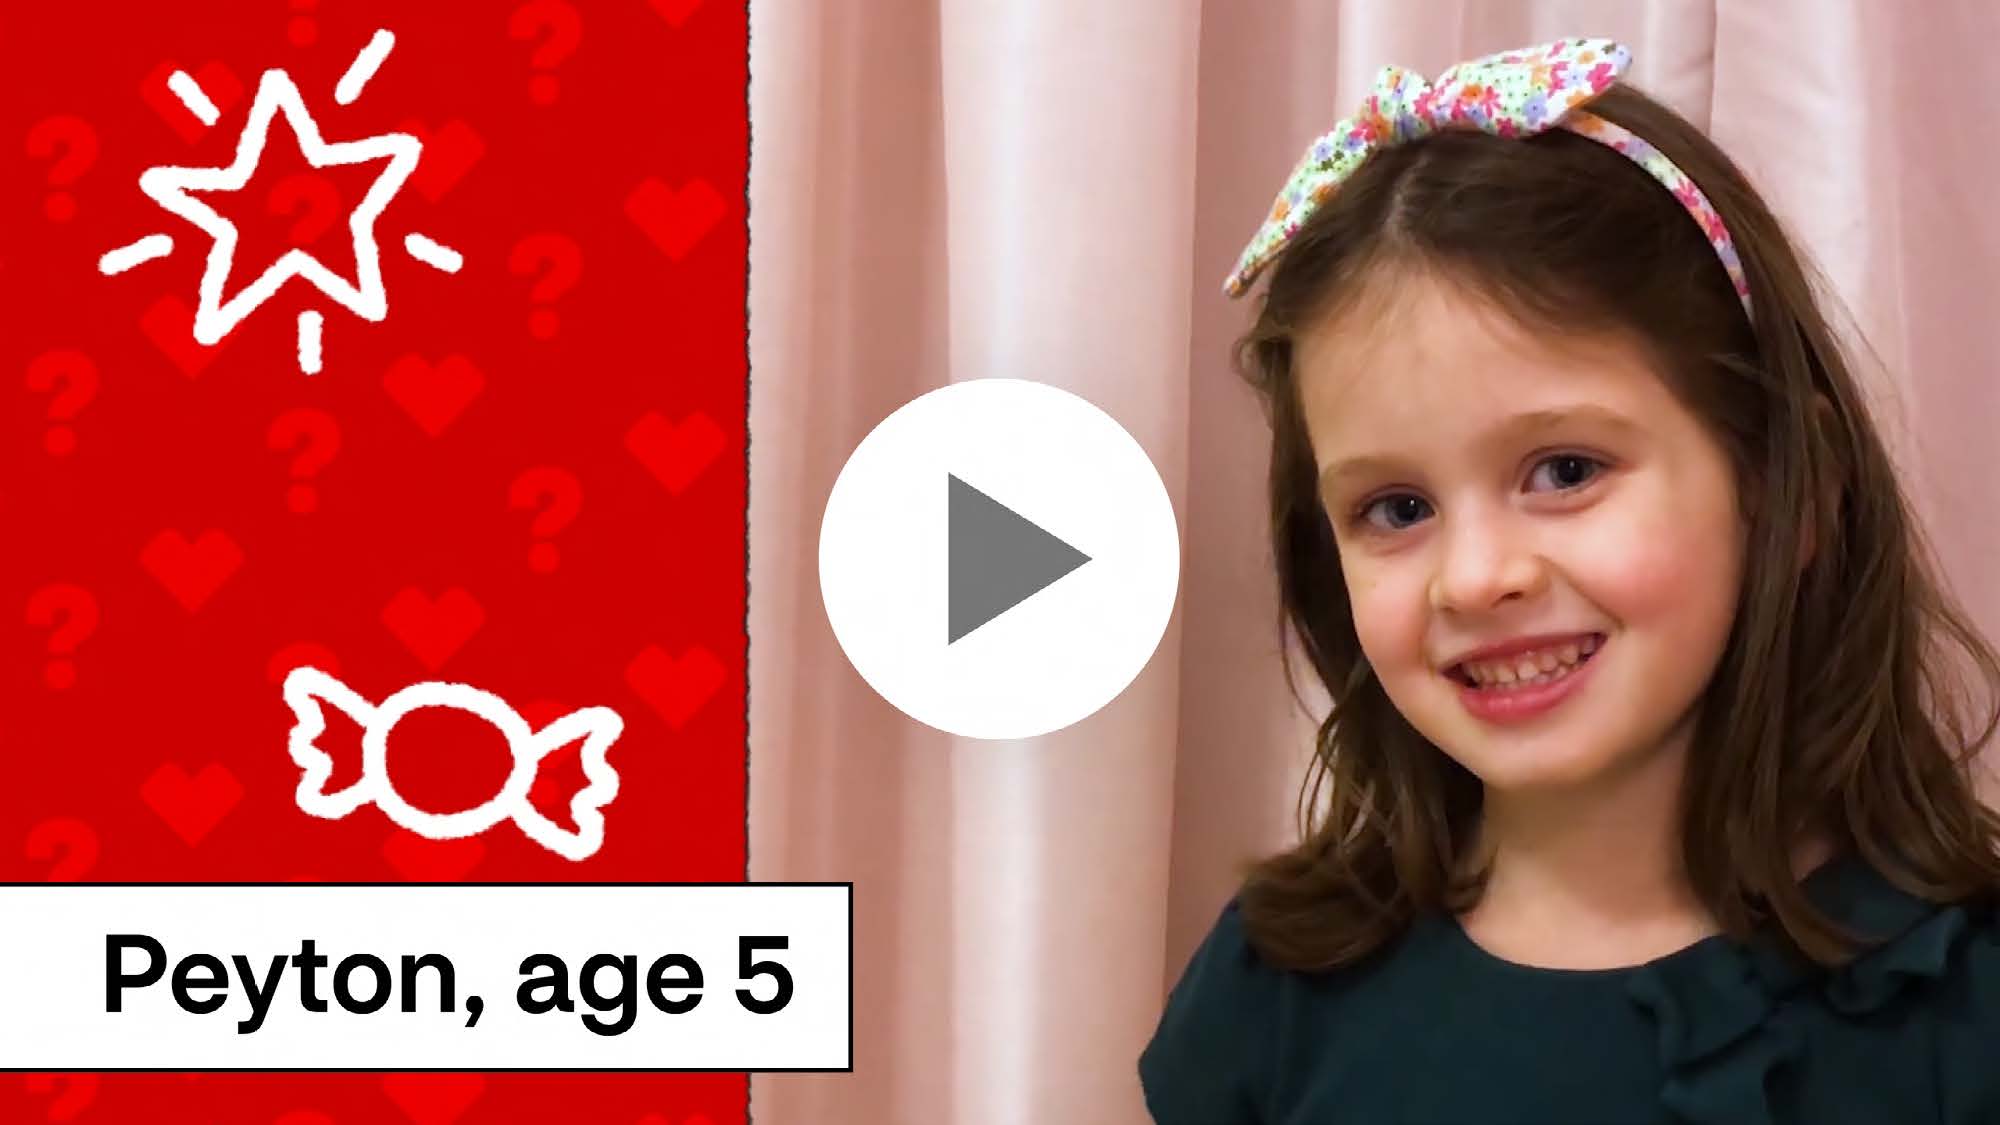 Play video of Peyton, age 5, asking “Will the vaccine be safe?”